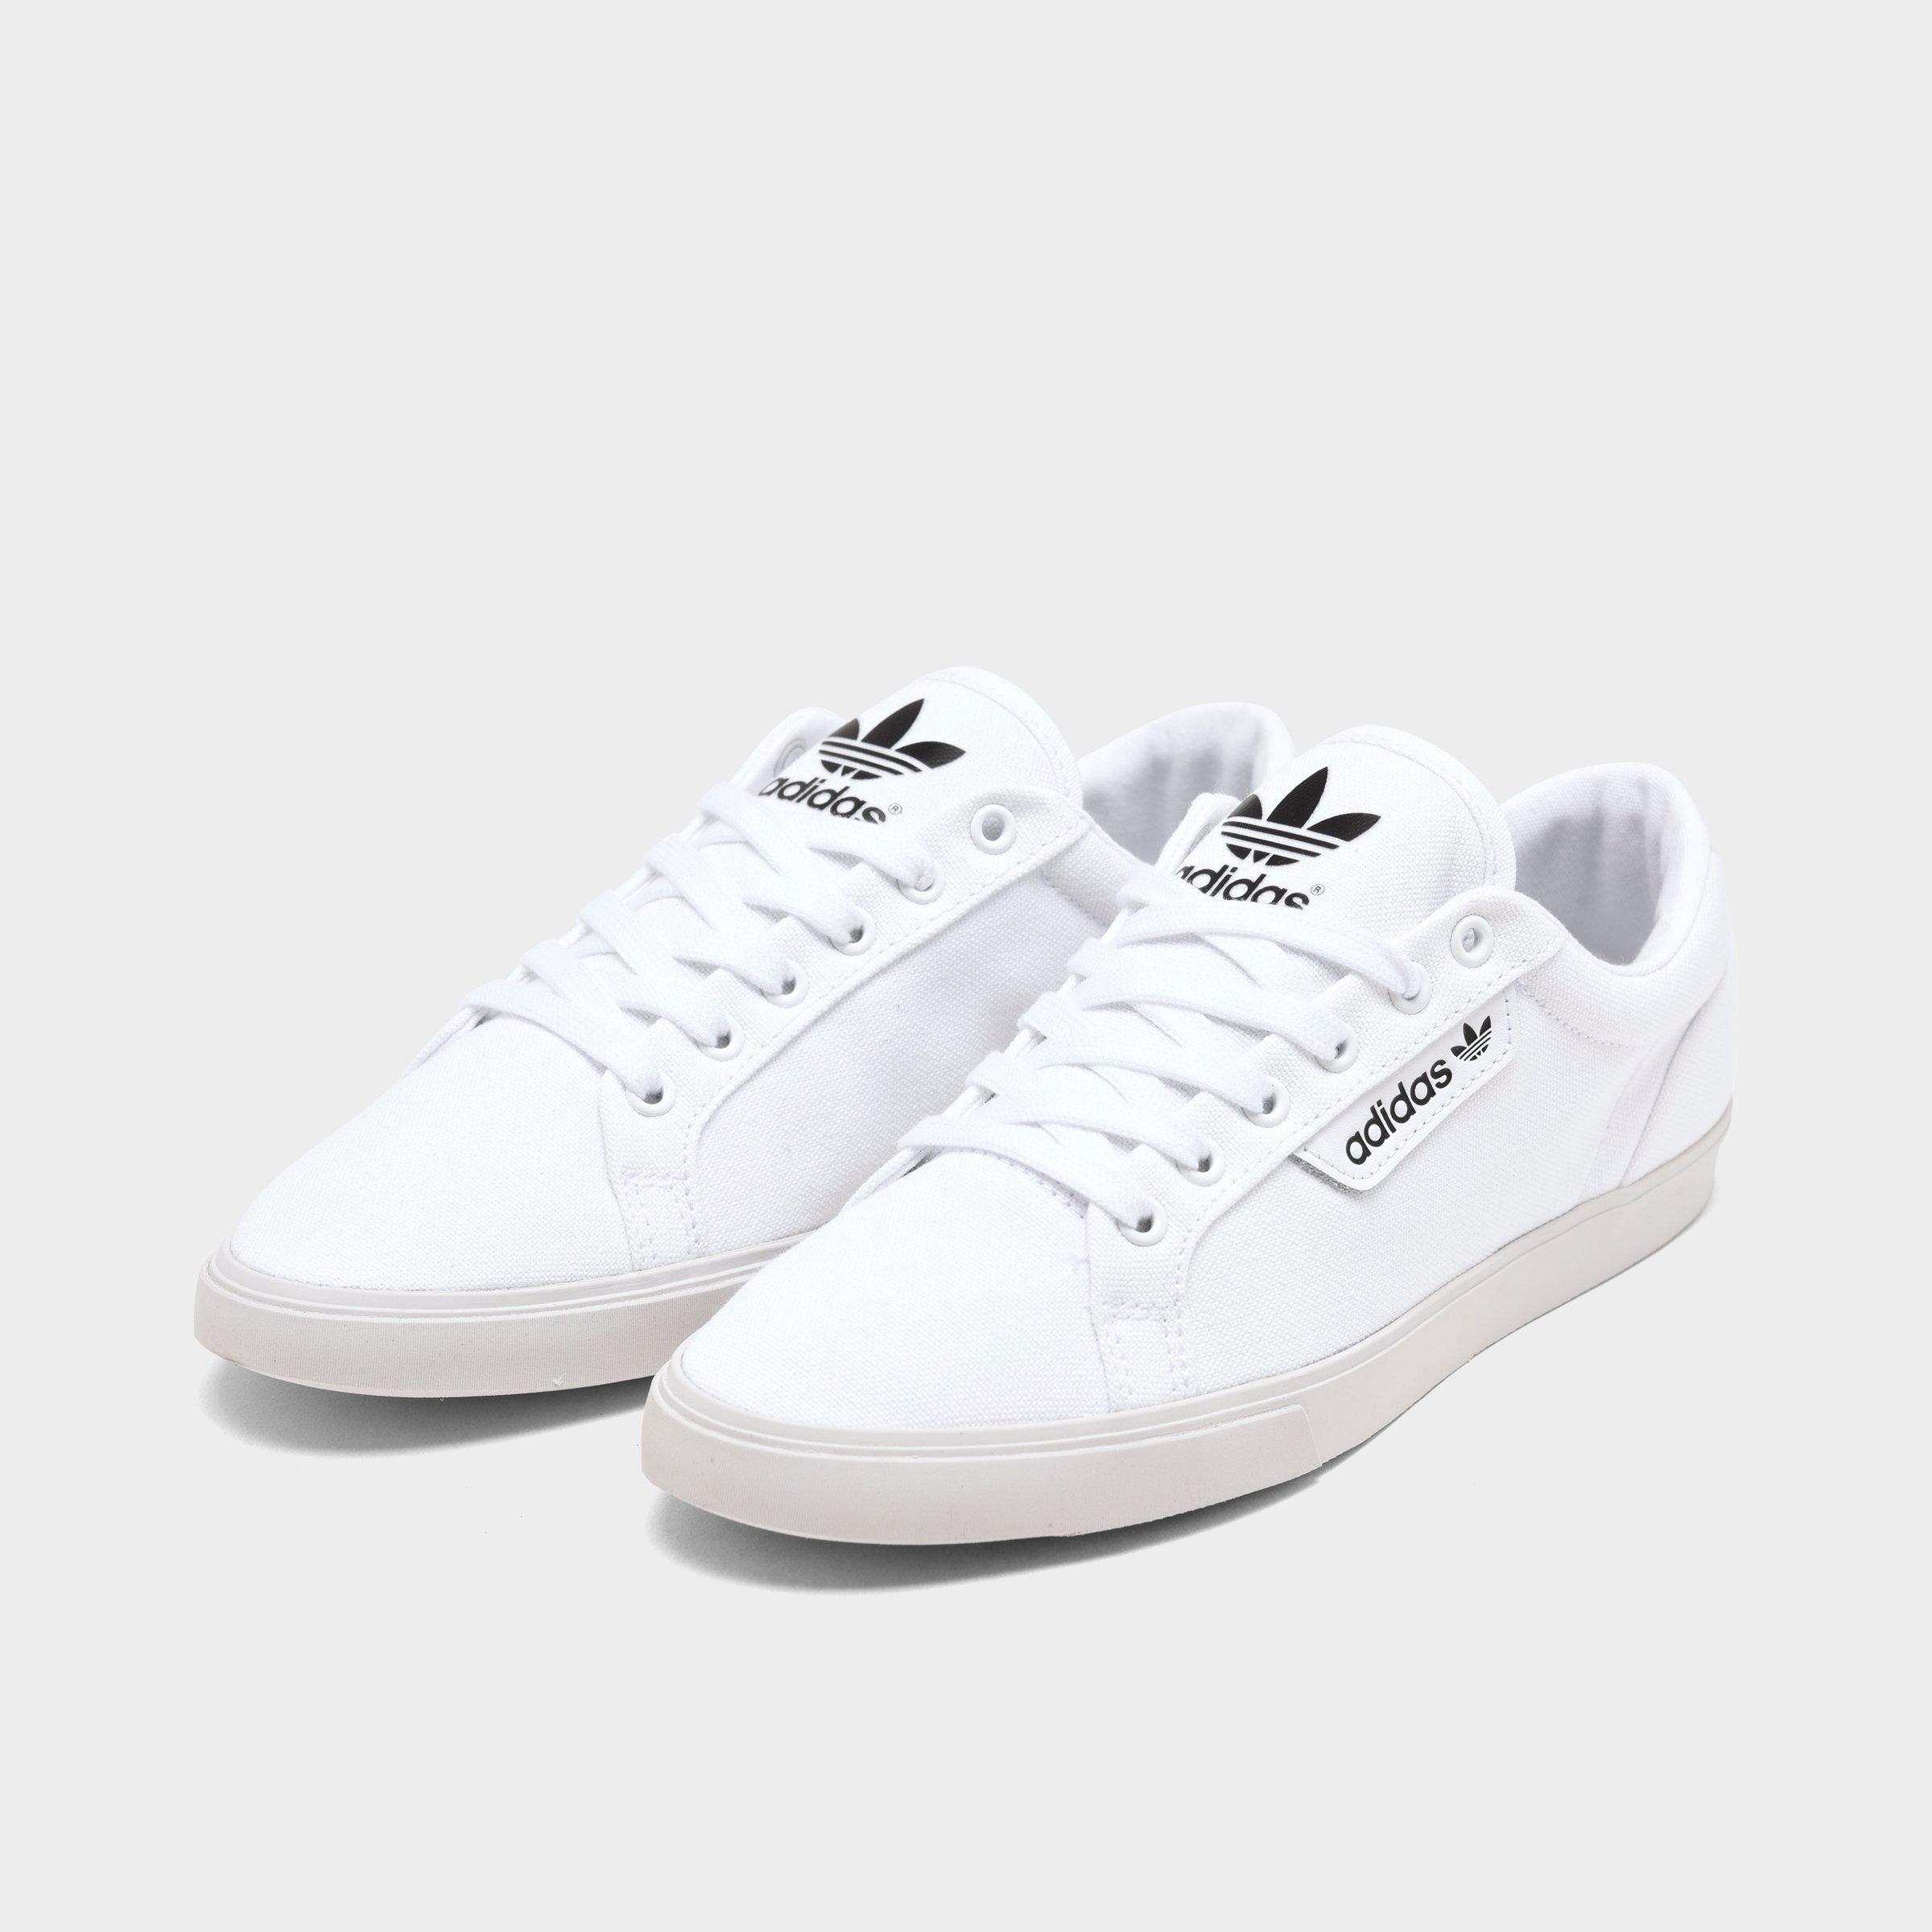 adidas women's canvas shoes